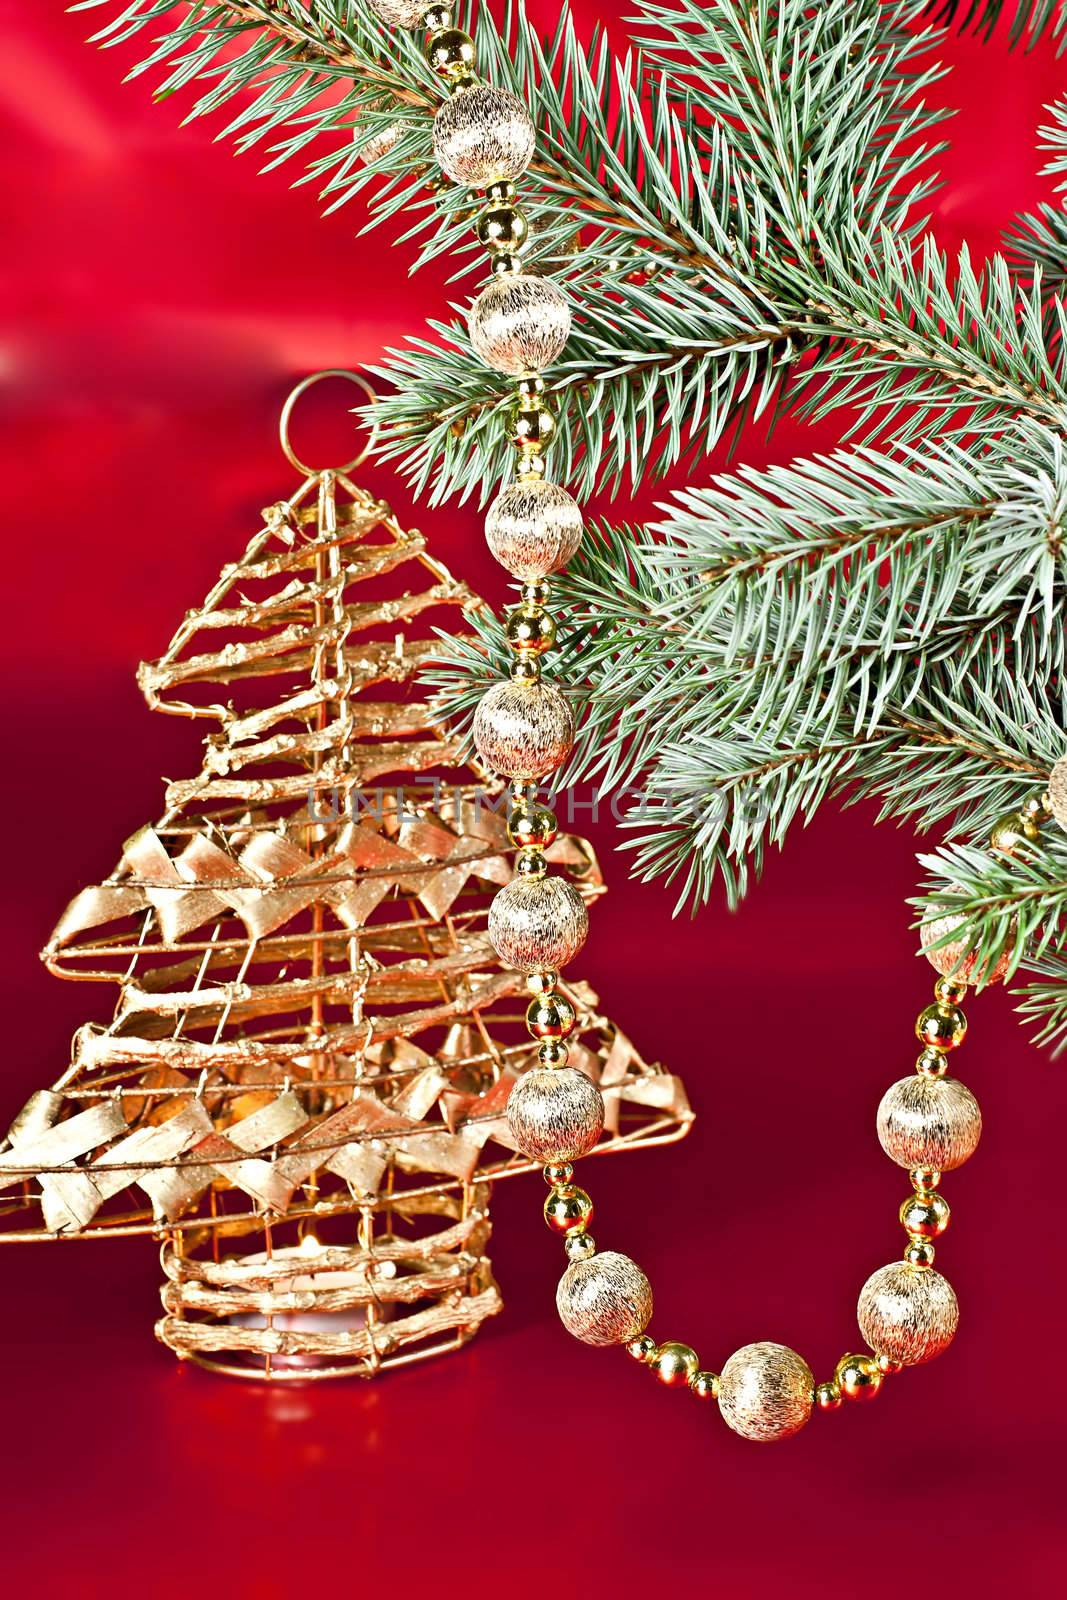 
On a red background with a spruce twig Christmas decoration ball on a string of candlesticks.
